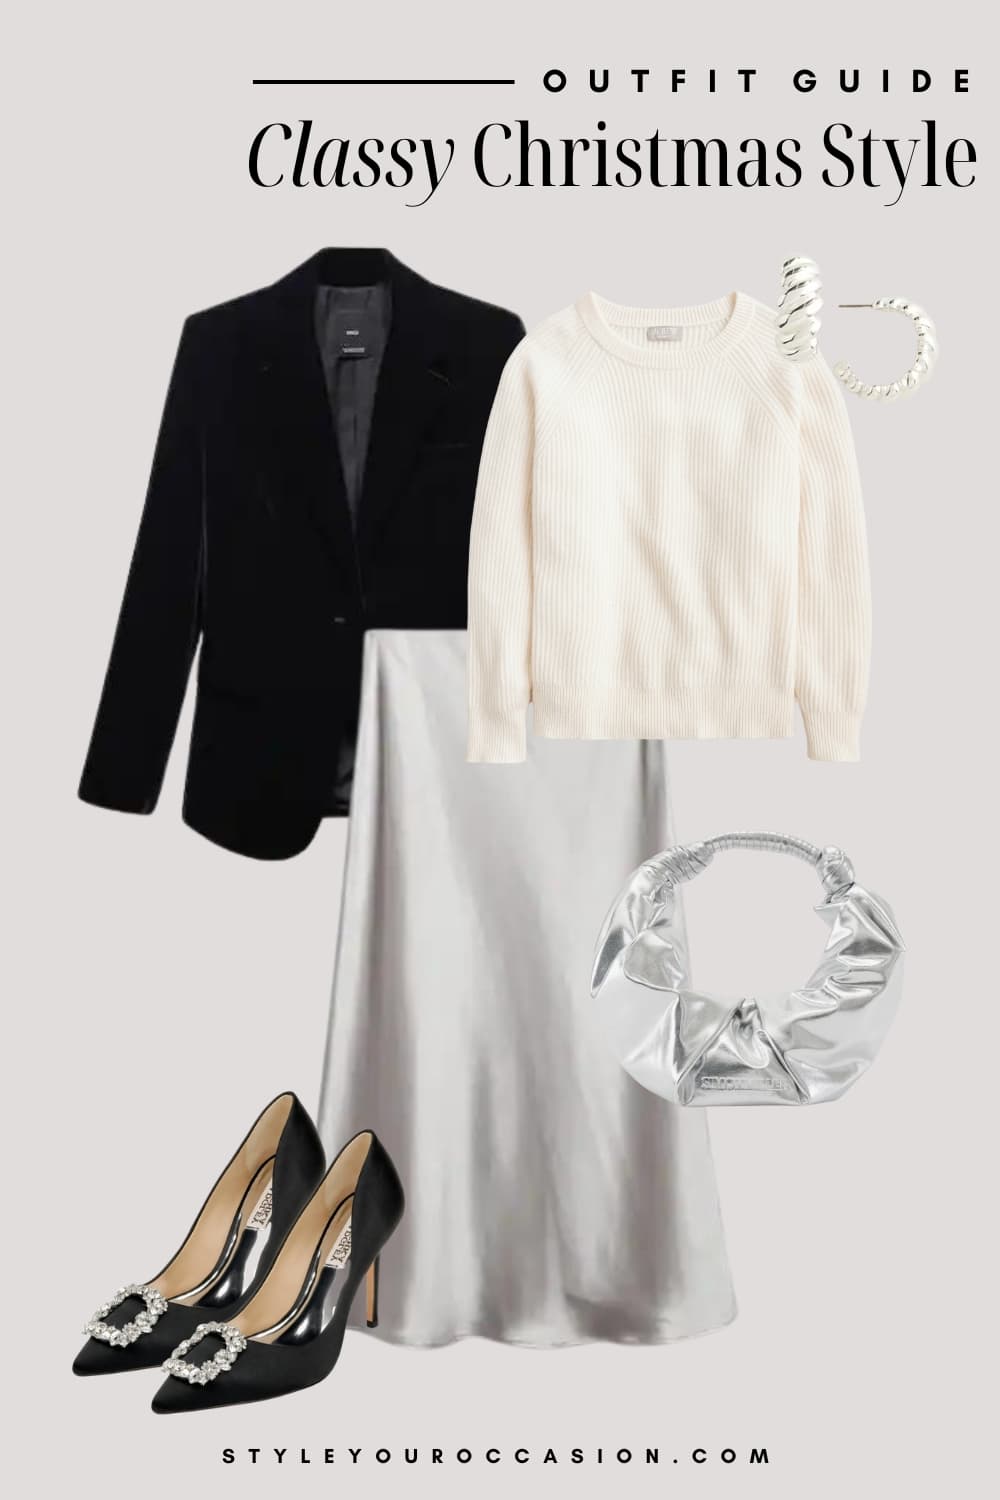 An image board of a Christmas outfit featuring a grey silk midi skirt, a white knit sweater, a black velvet blazer, black heels with silver buckles, a silver half moon purse, and silver croissant hoops